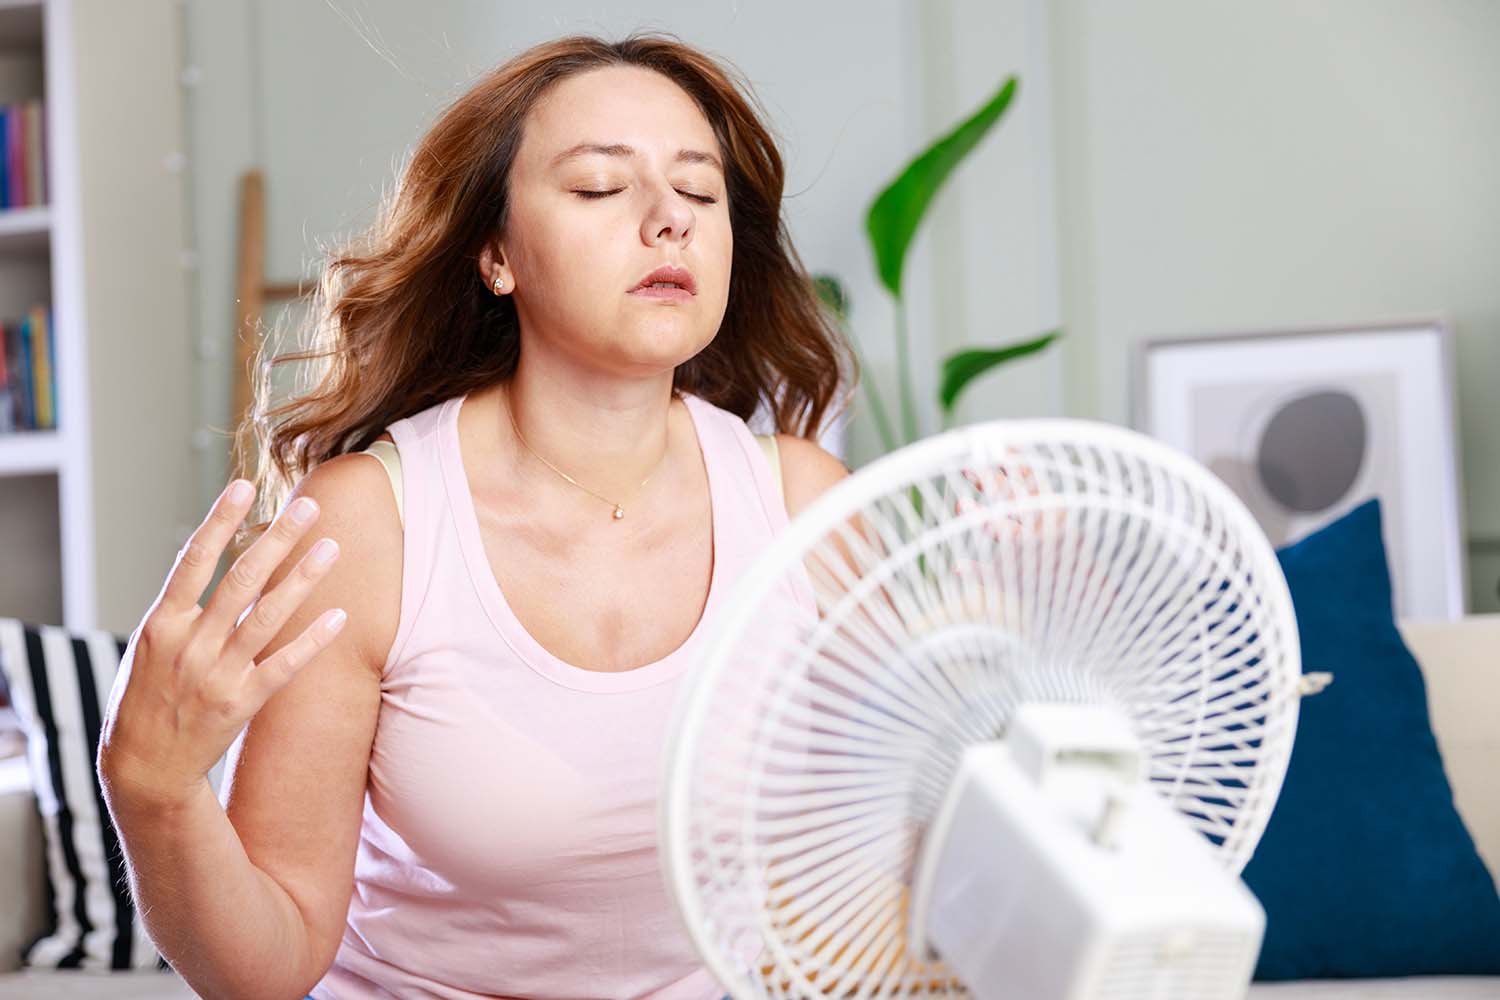 person in front of fan trying to cool off in her humid house